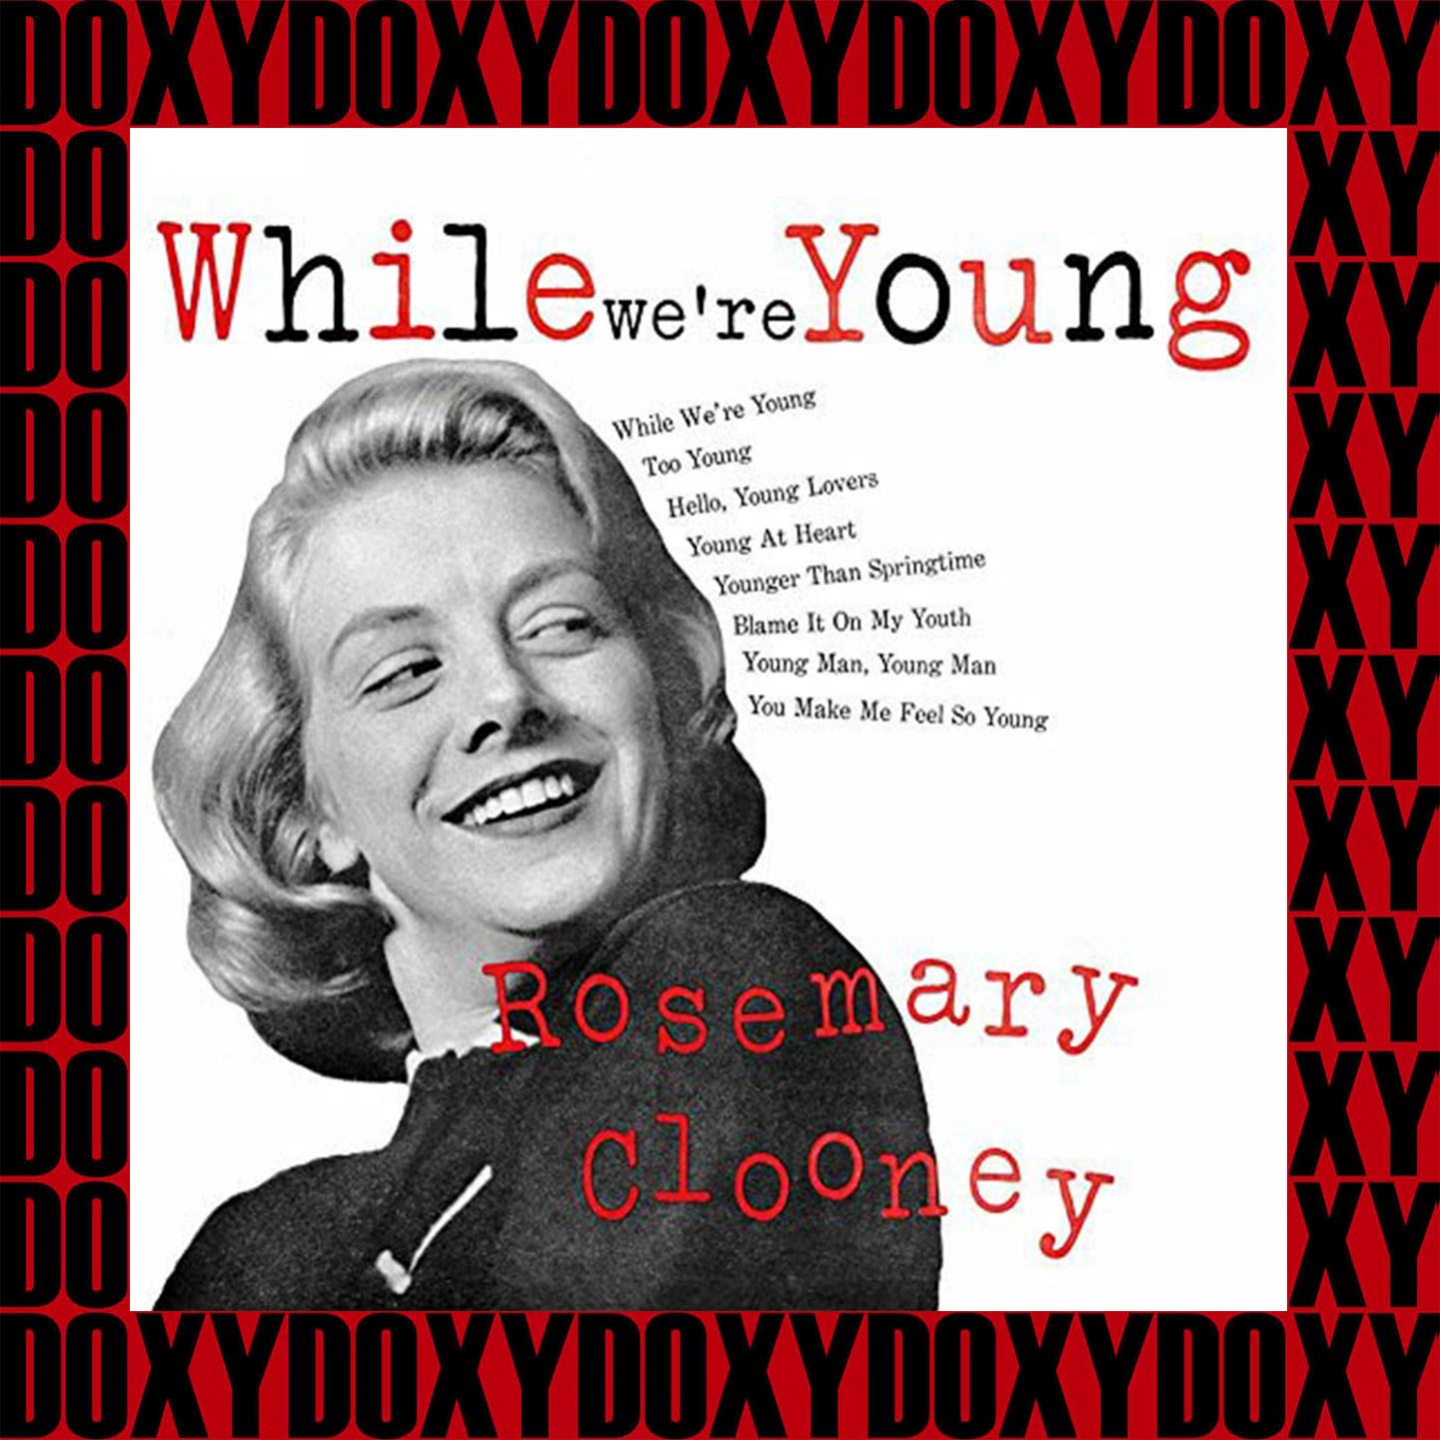 While We're Young (Remastered Version) (Doxy Collection)